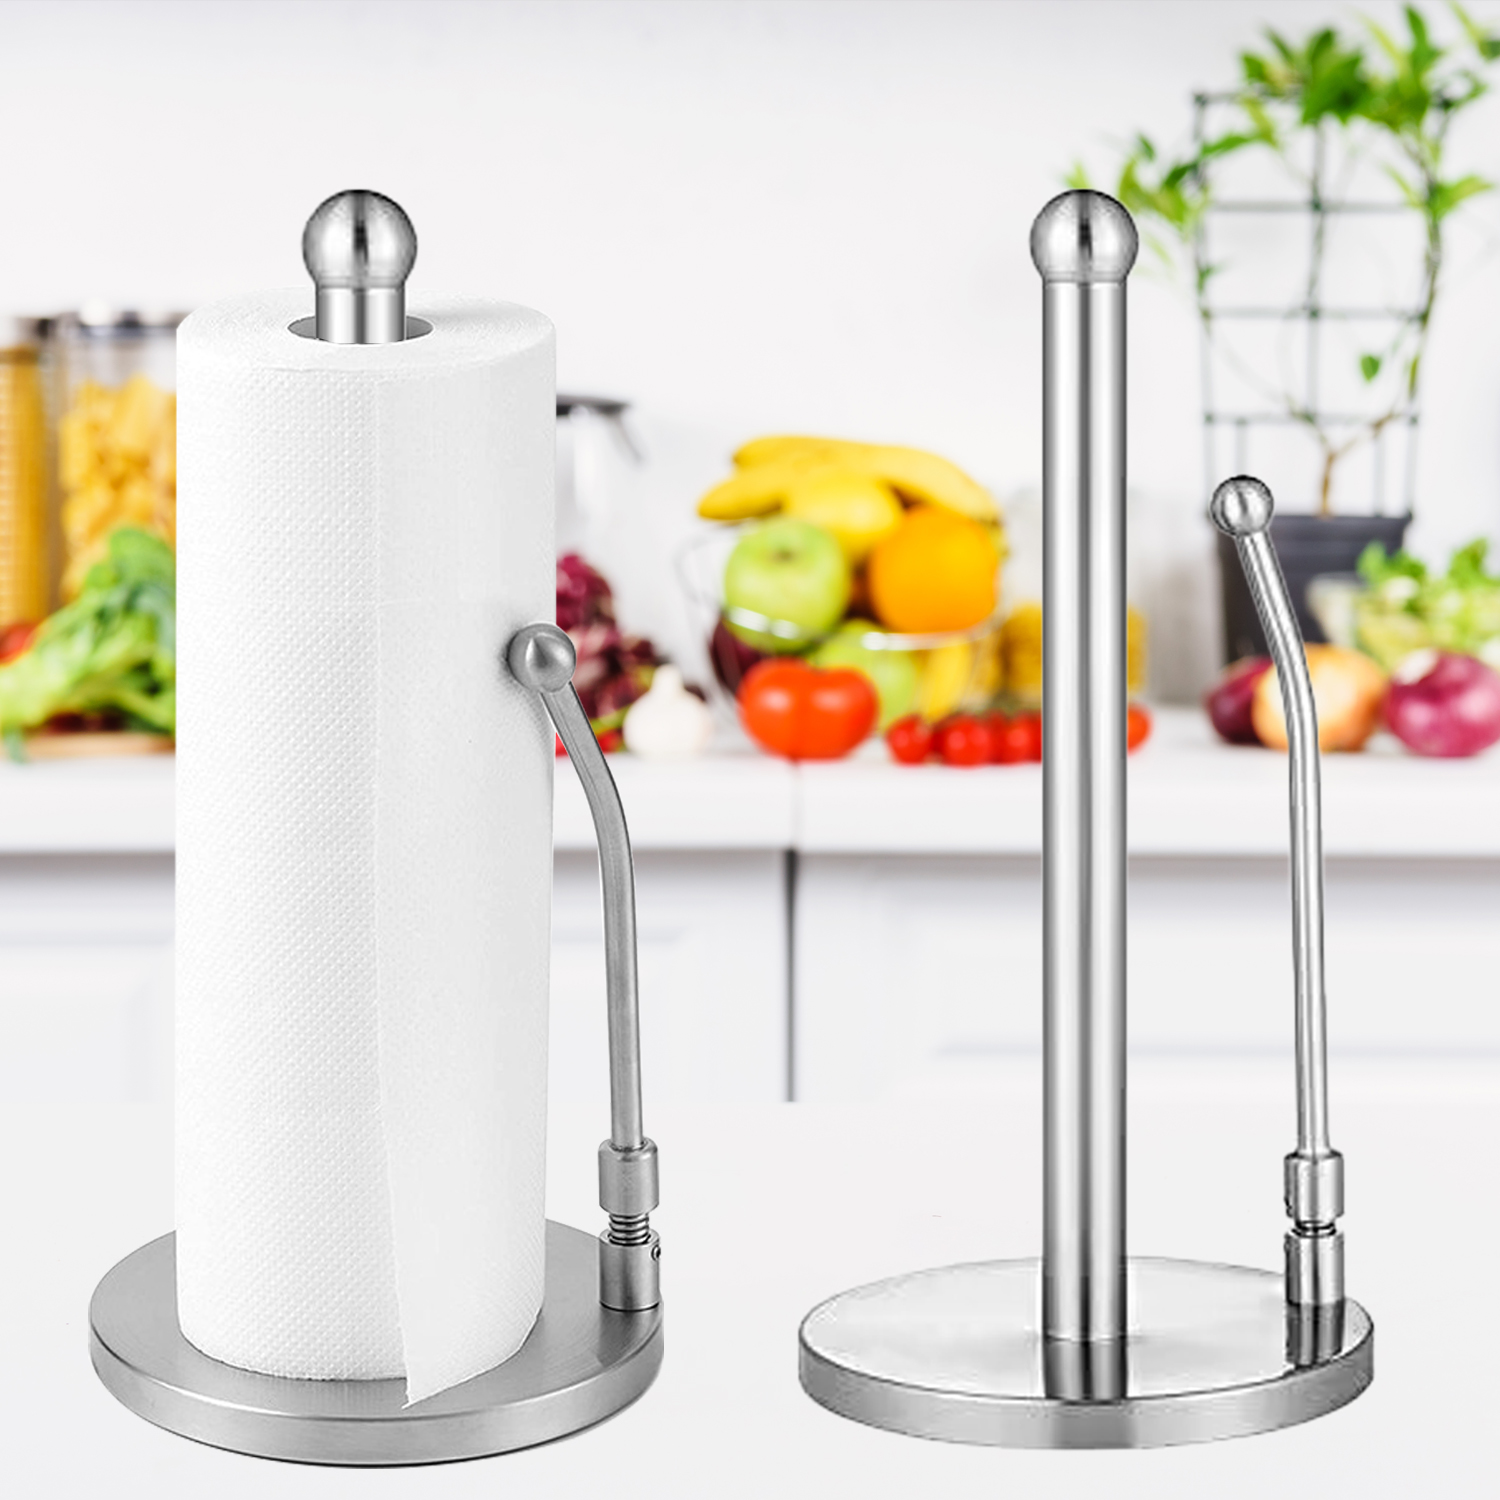 Stainless Steel Vertical Paper Towel Holder Stand For Home Kitchen Countertop Living Room Napkins Paper Roll Holder Storage Rack